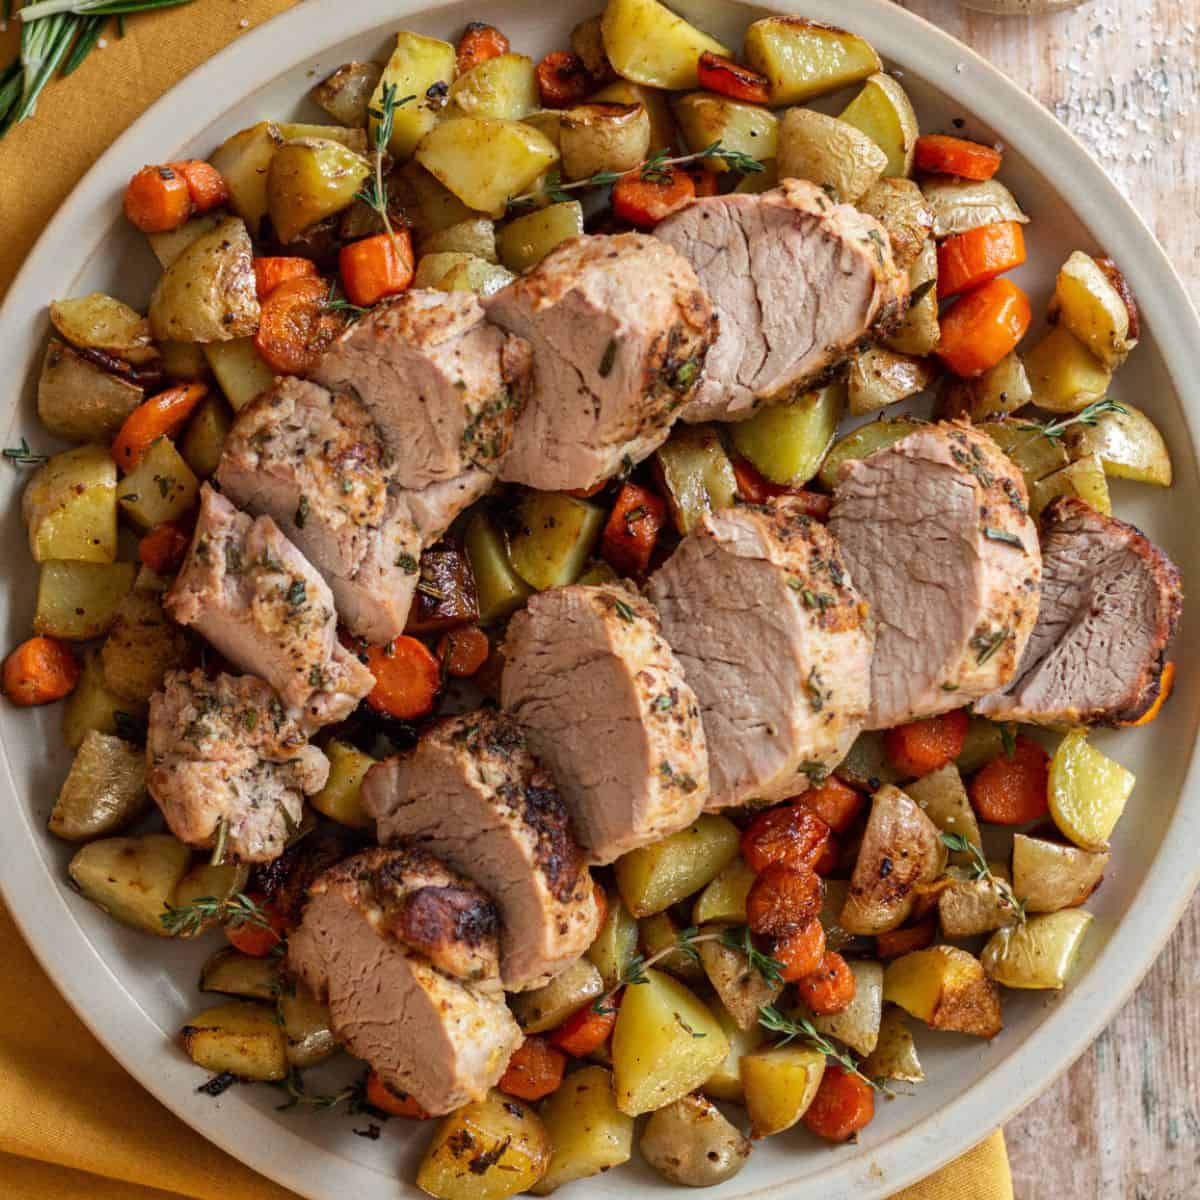 Cast Iron Skillet Pork Tenderloin on a round plate with roasted potatoes and carrots. Garnished with fresh thyme.